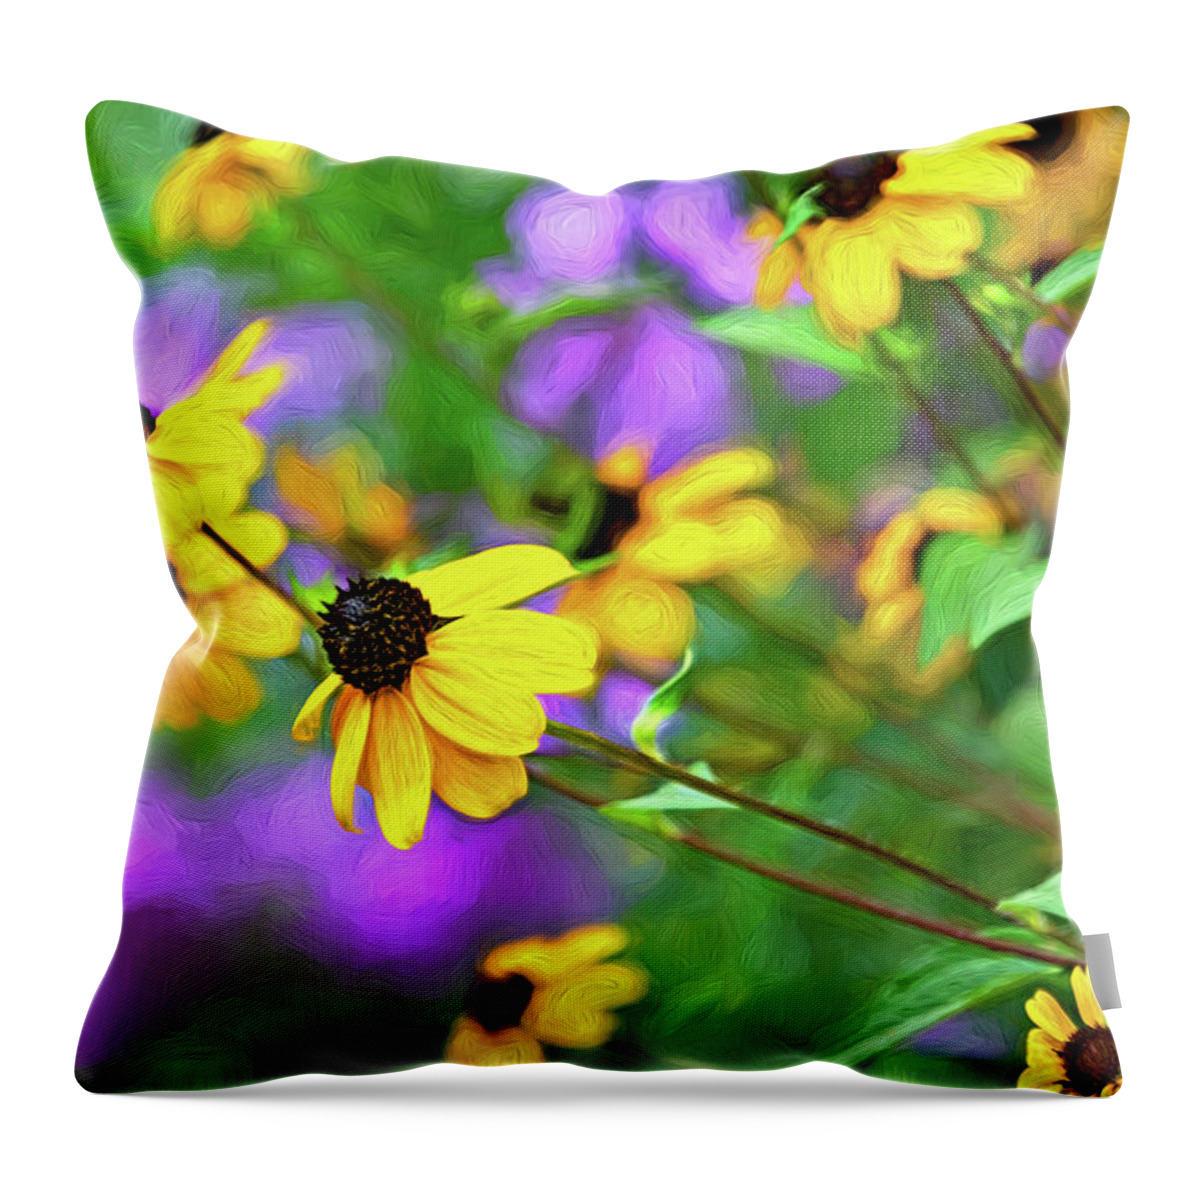 Susie Q Throw Pillow featuring the photograph A Day In August 2 - Impasto by Steve Harrington